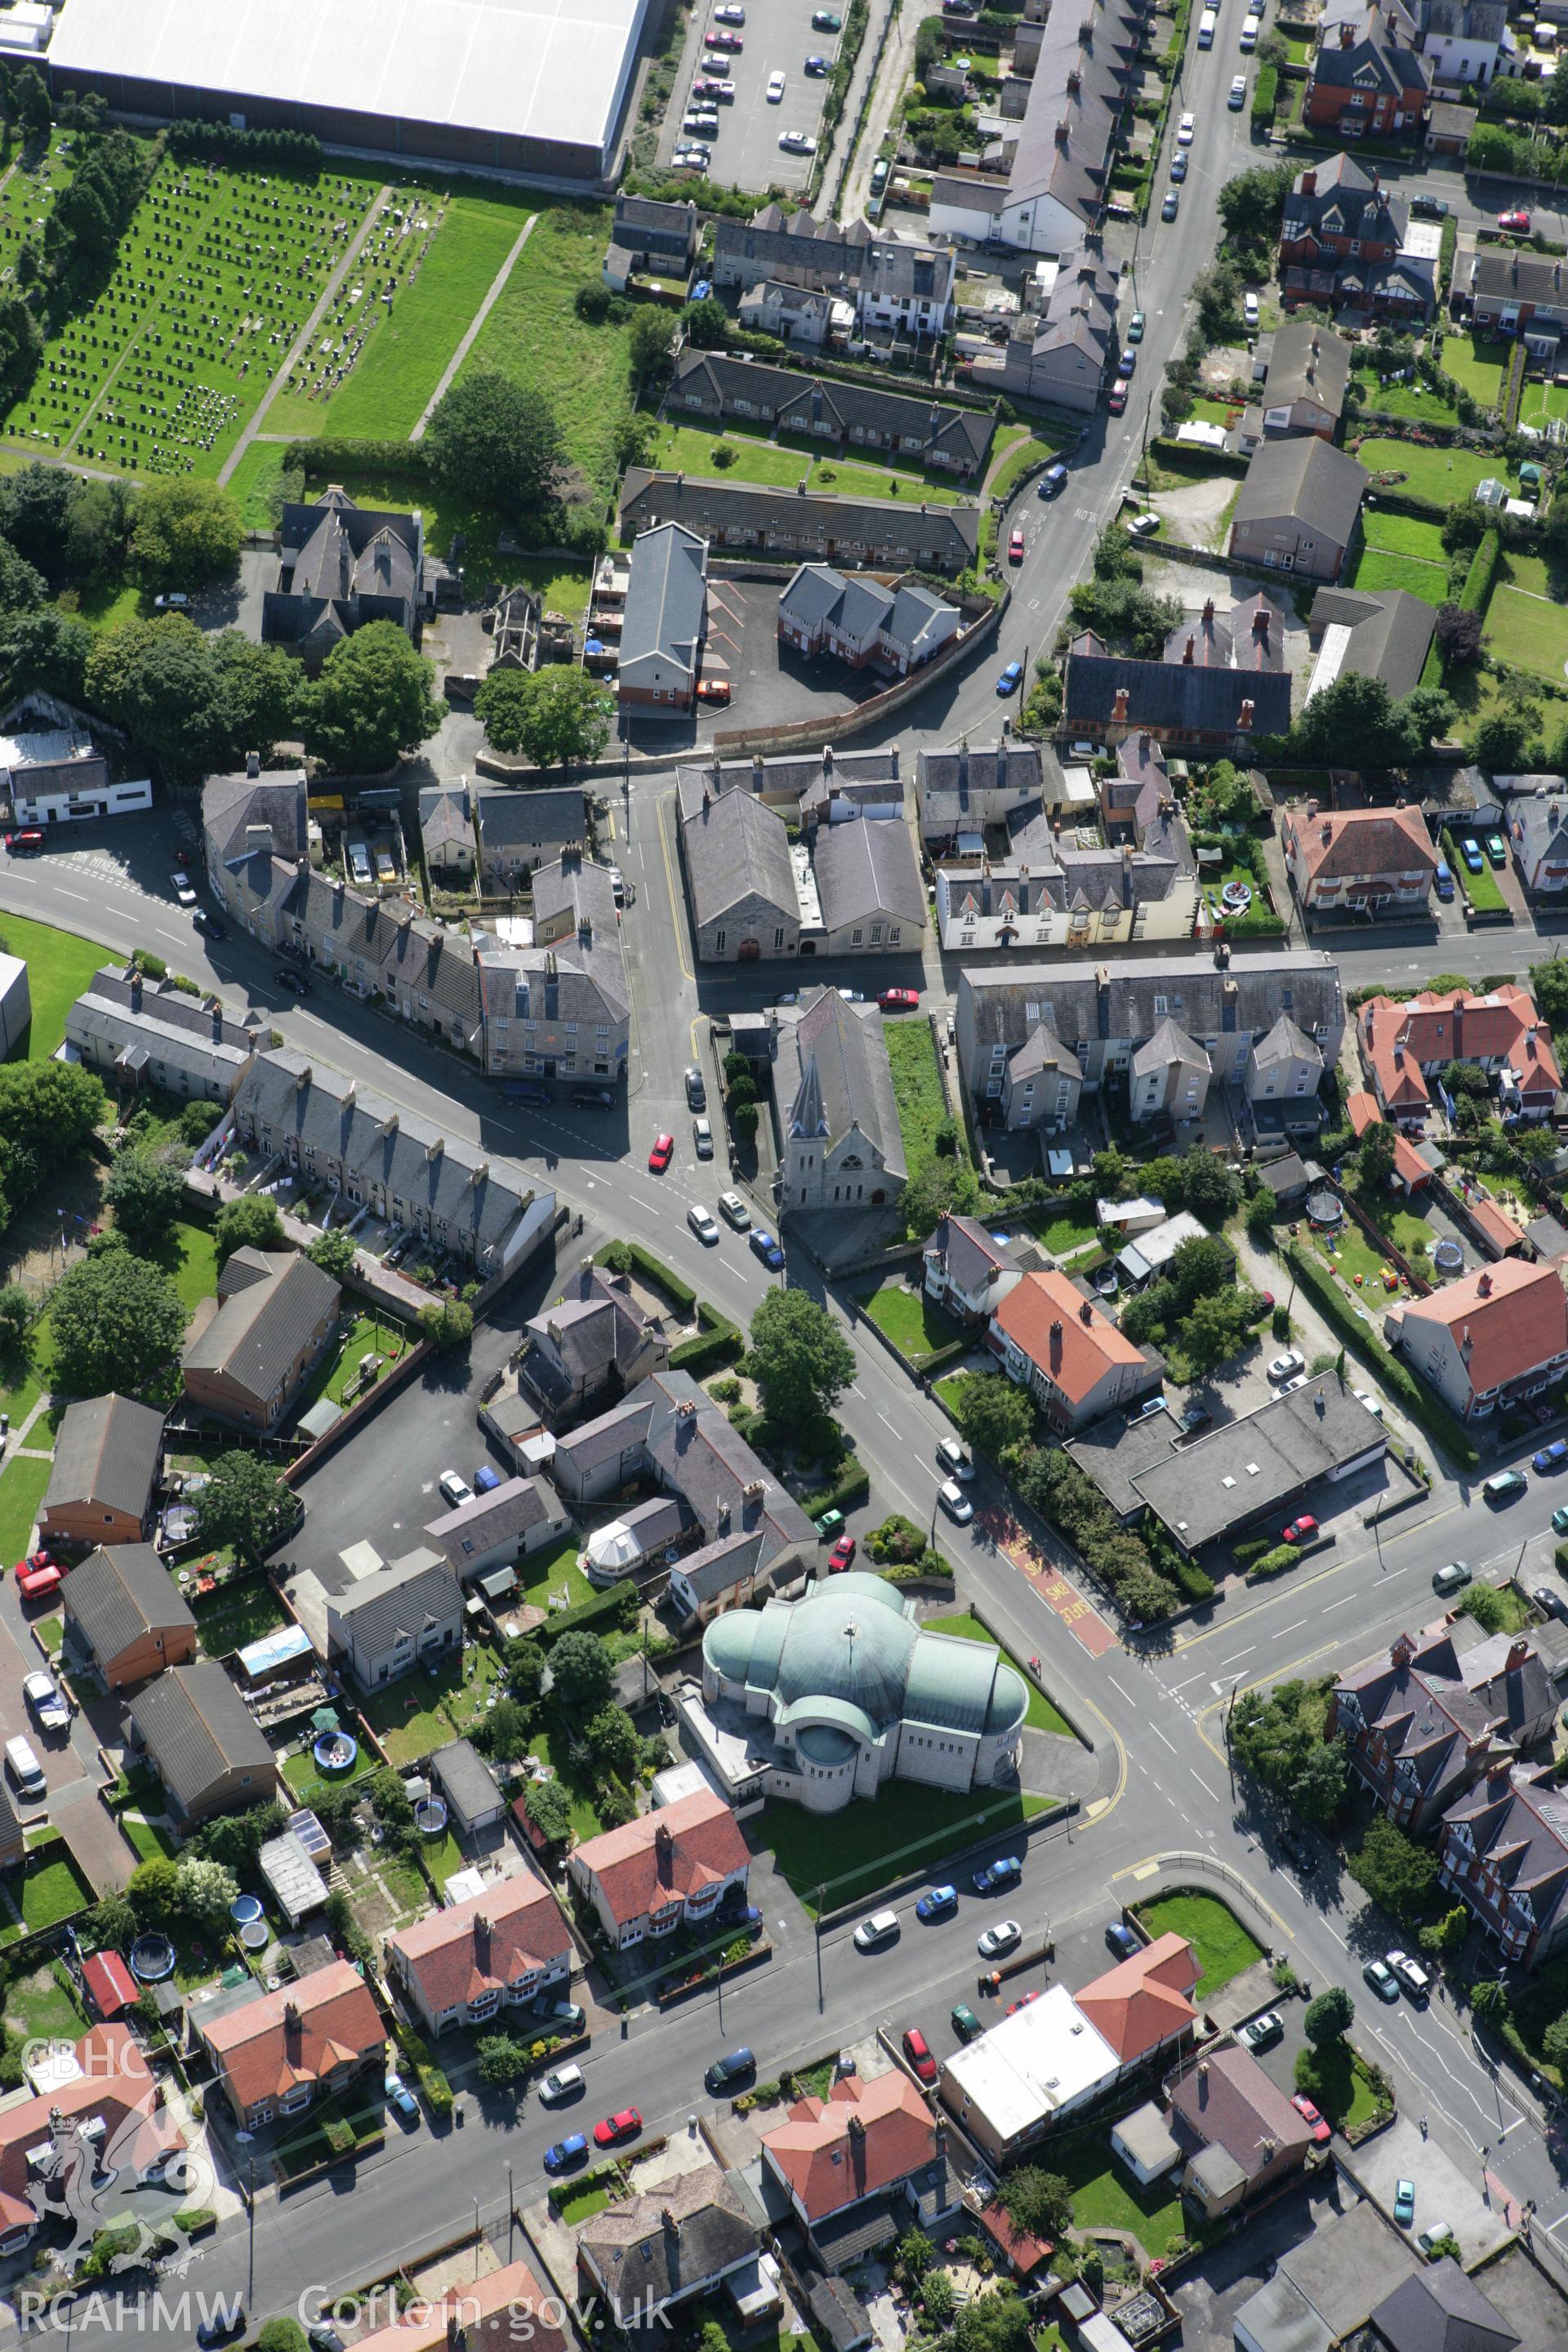 RCAHMW colour oblique aerial photograph of Abergele with the Catholic church visible. Taken on 31 July 2007 by Toby Driver